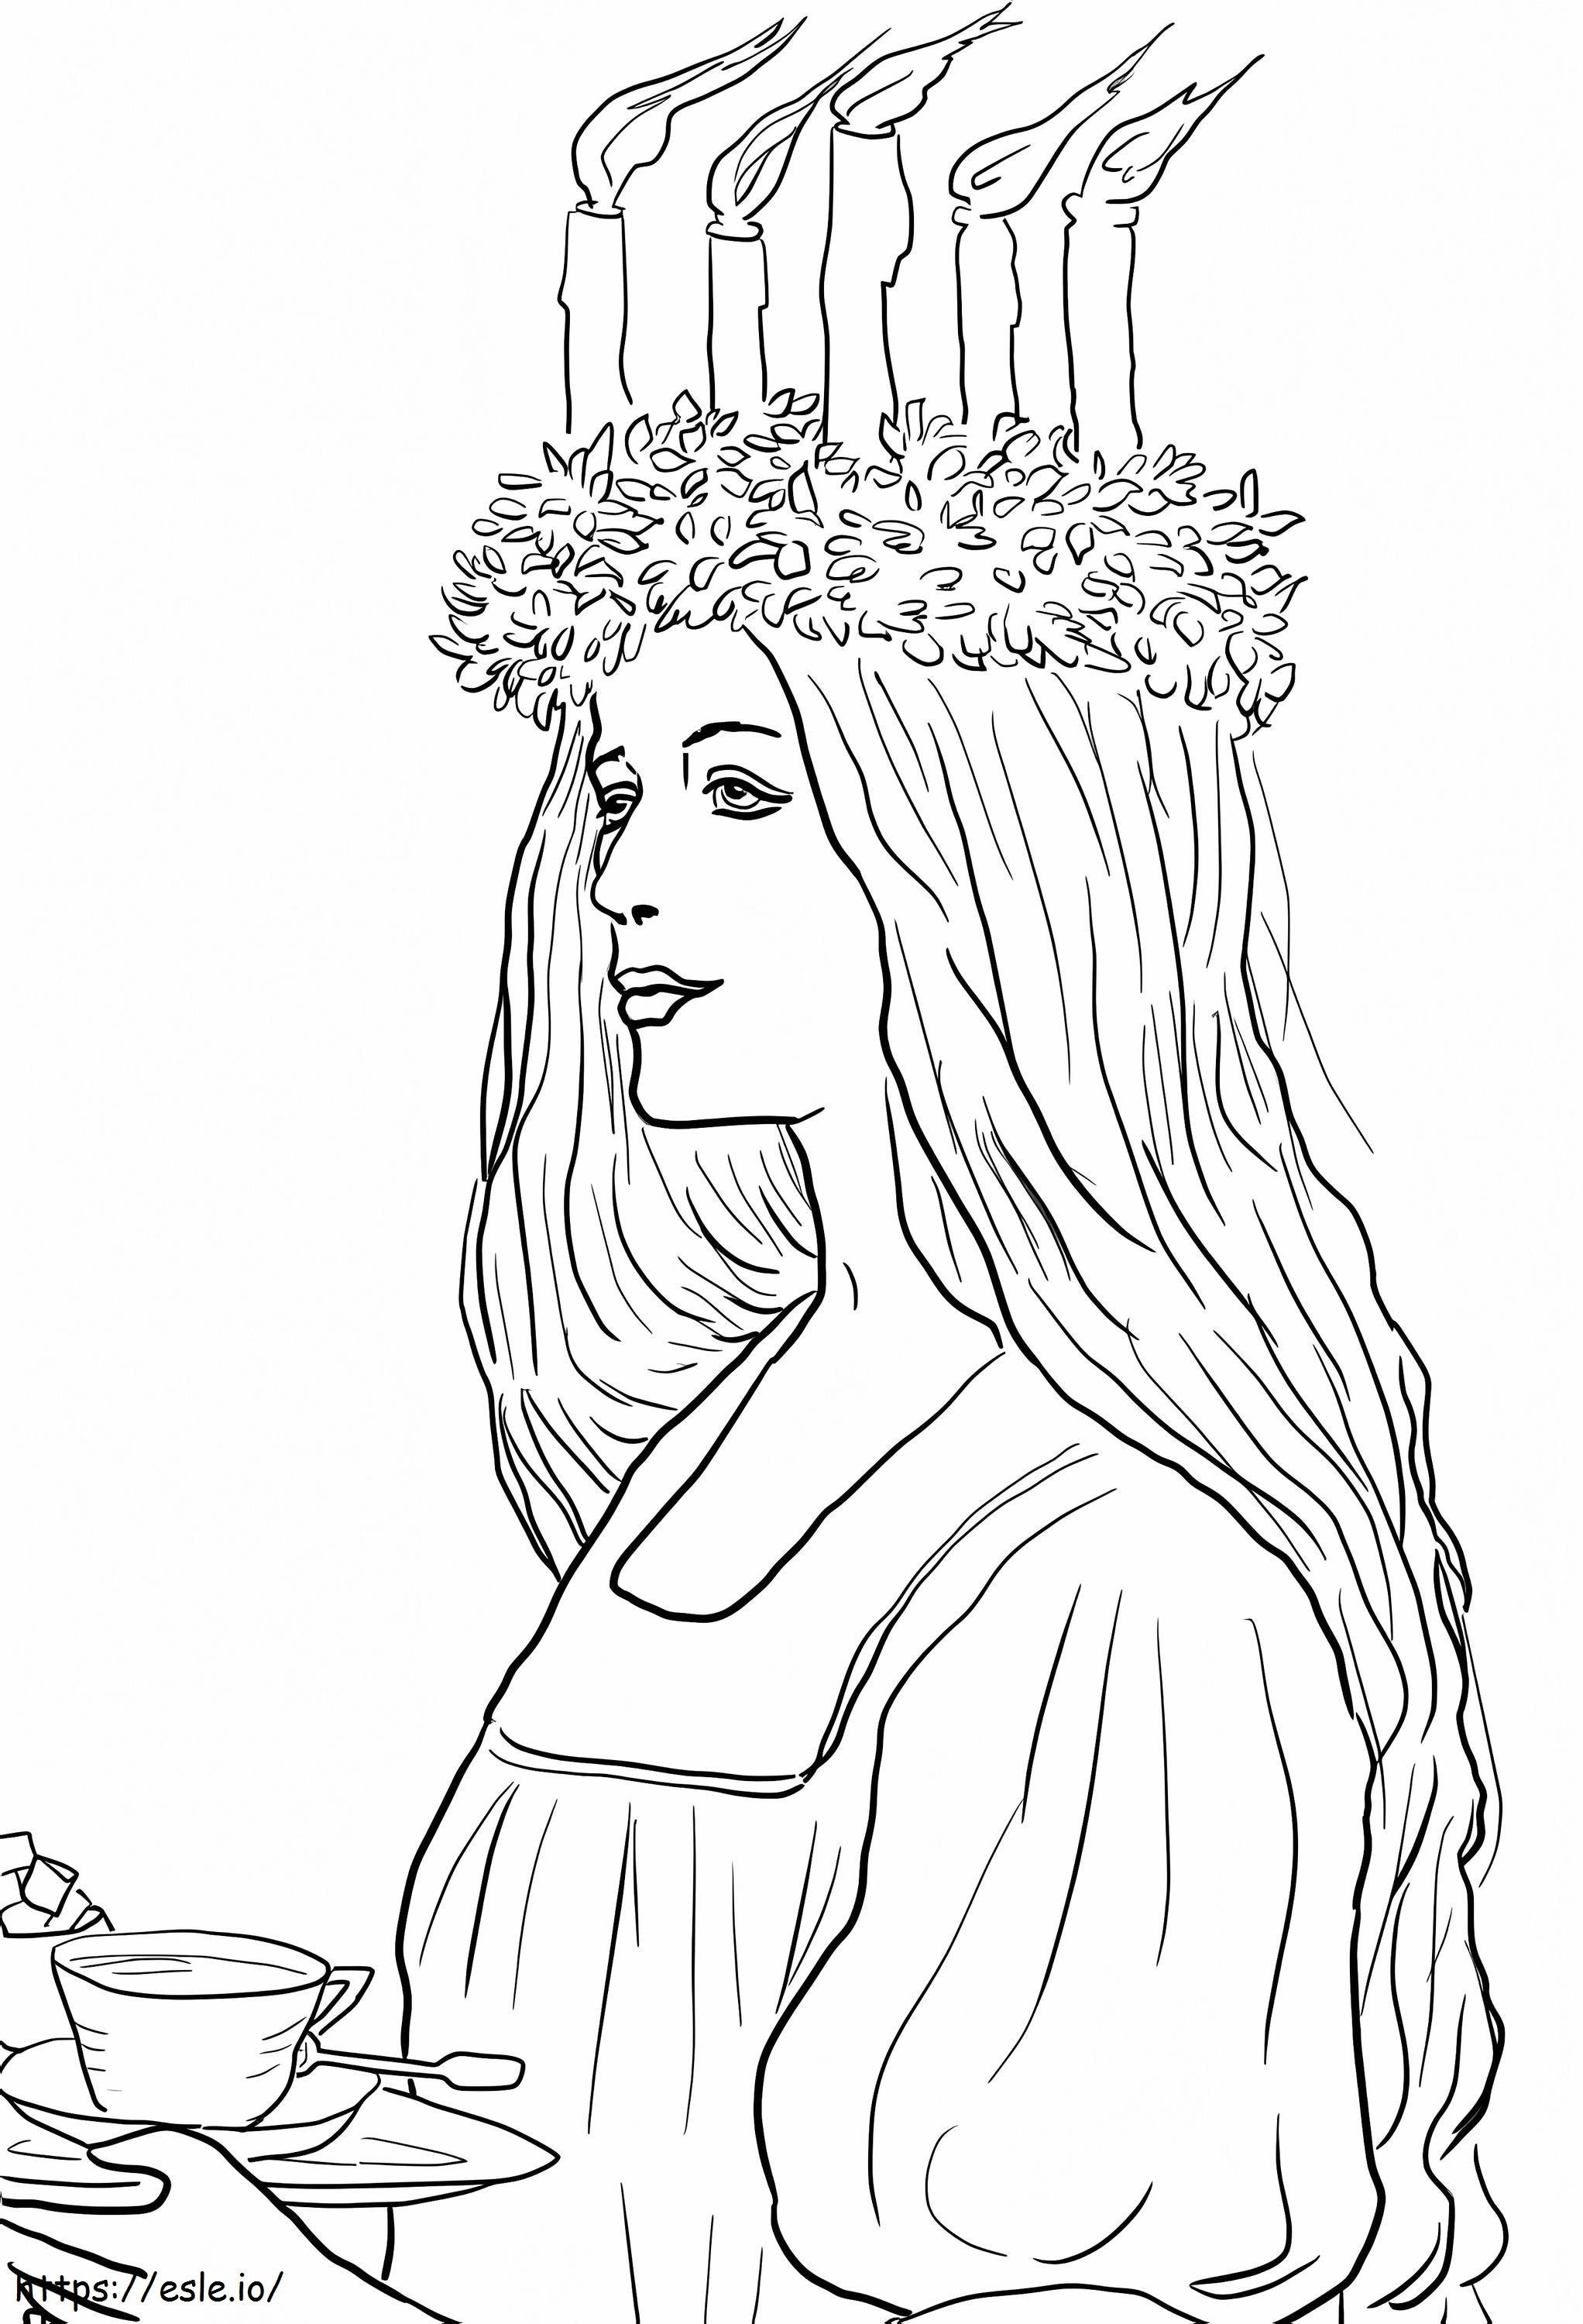 St. Lucia In Sweden coloring page